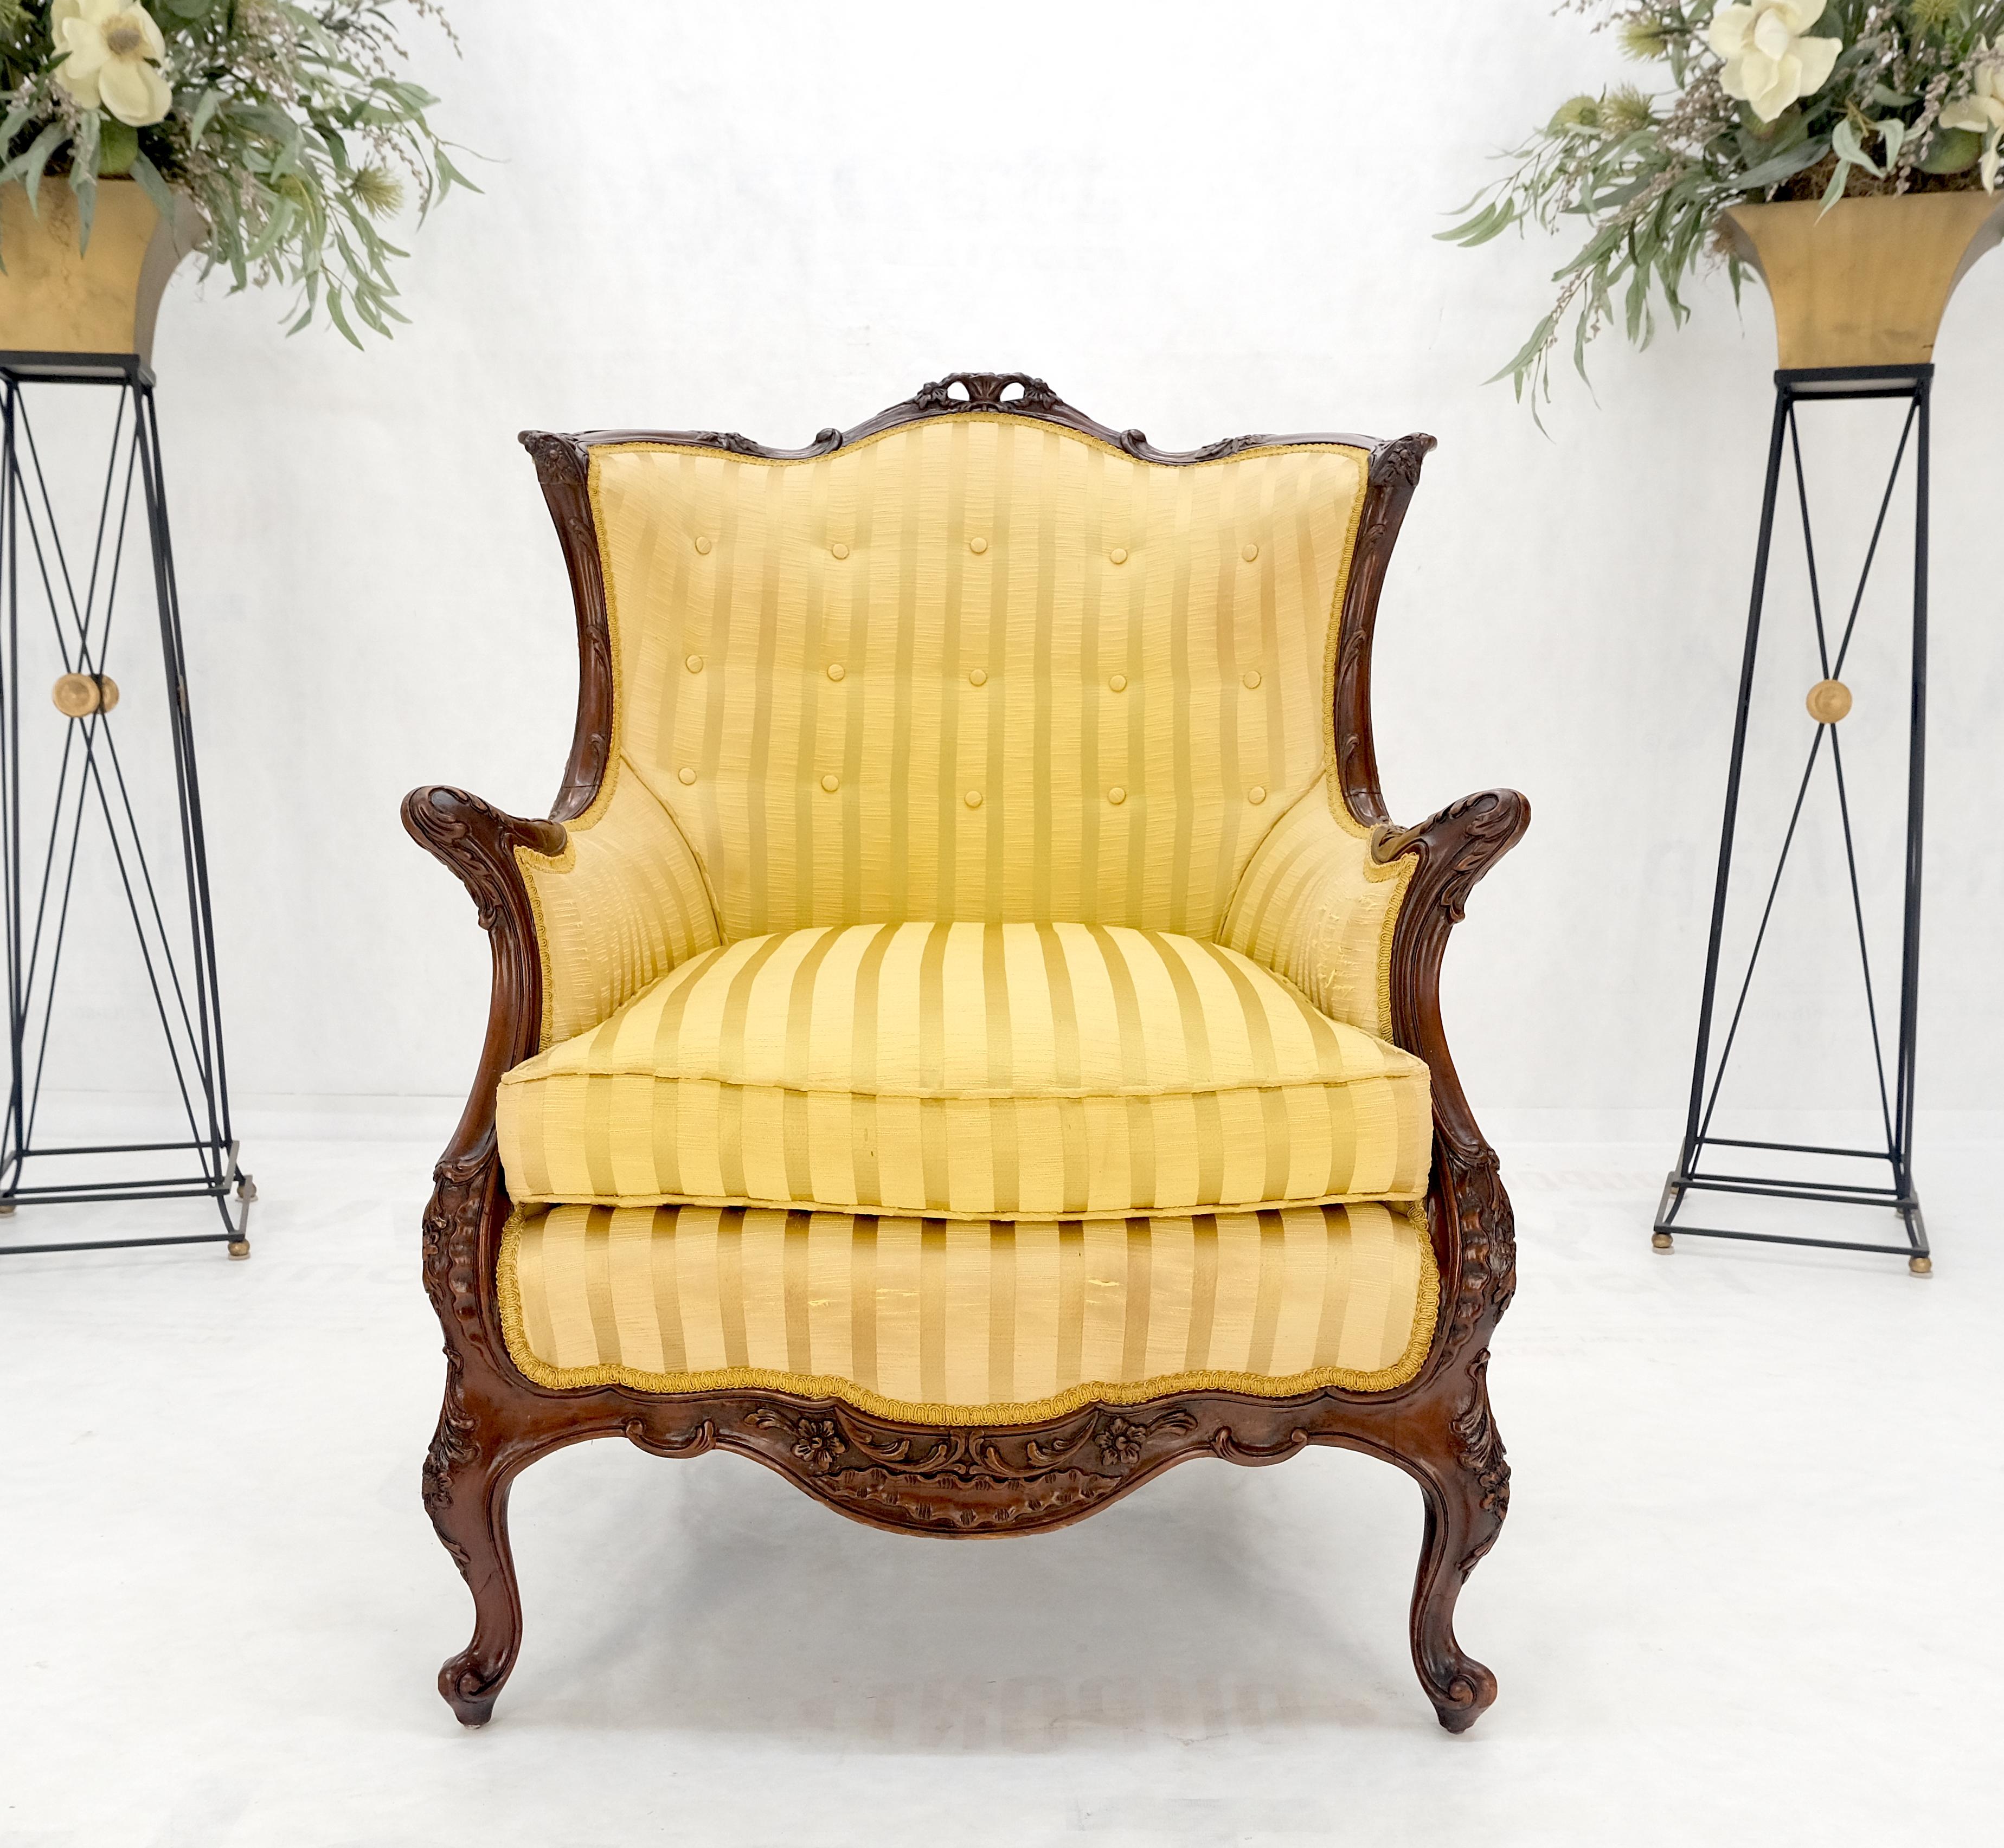 Striped Gold Upholstery Fine Deep Carved Mahogany Frame Lounge Chair Solid Frame In Fair Condition For Sale In Rockaway, NJ